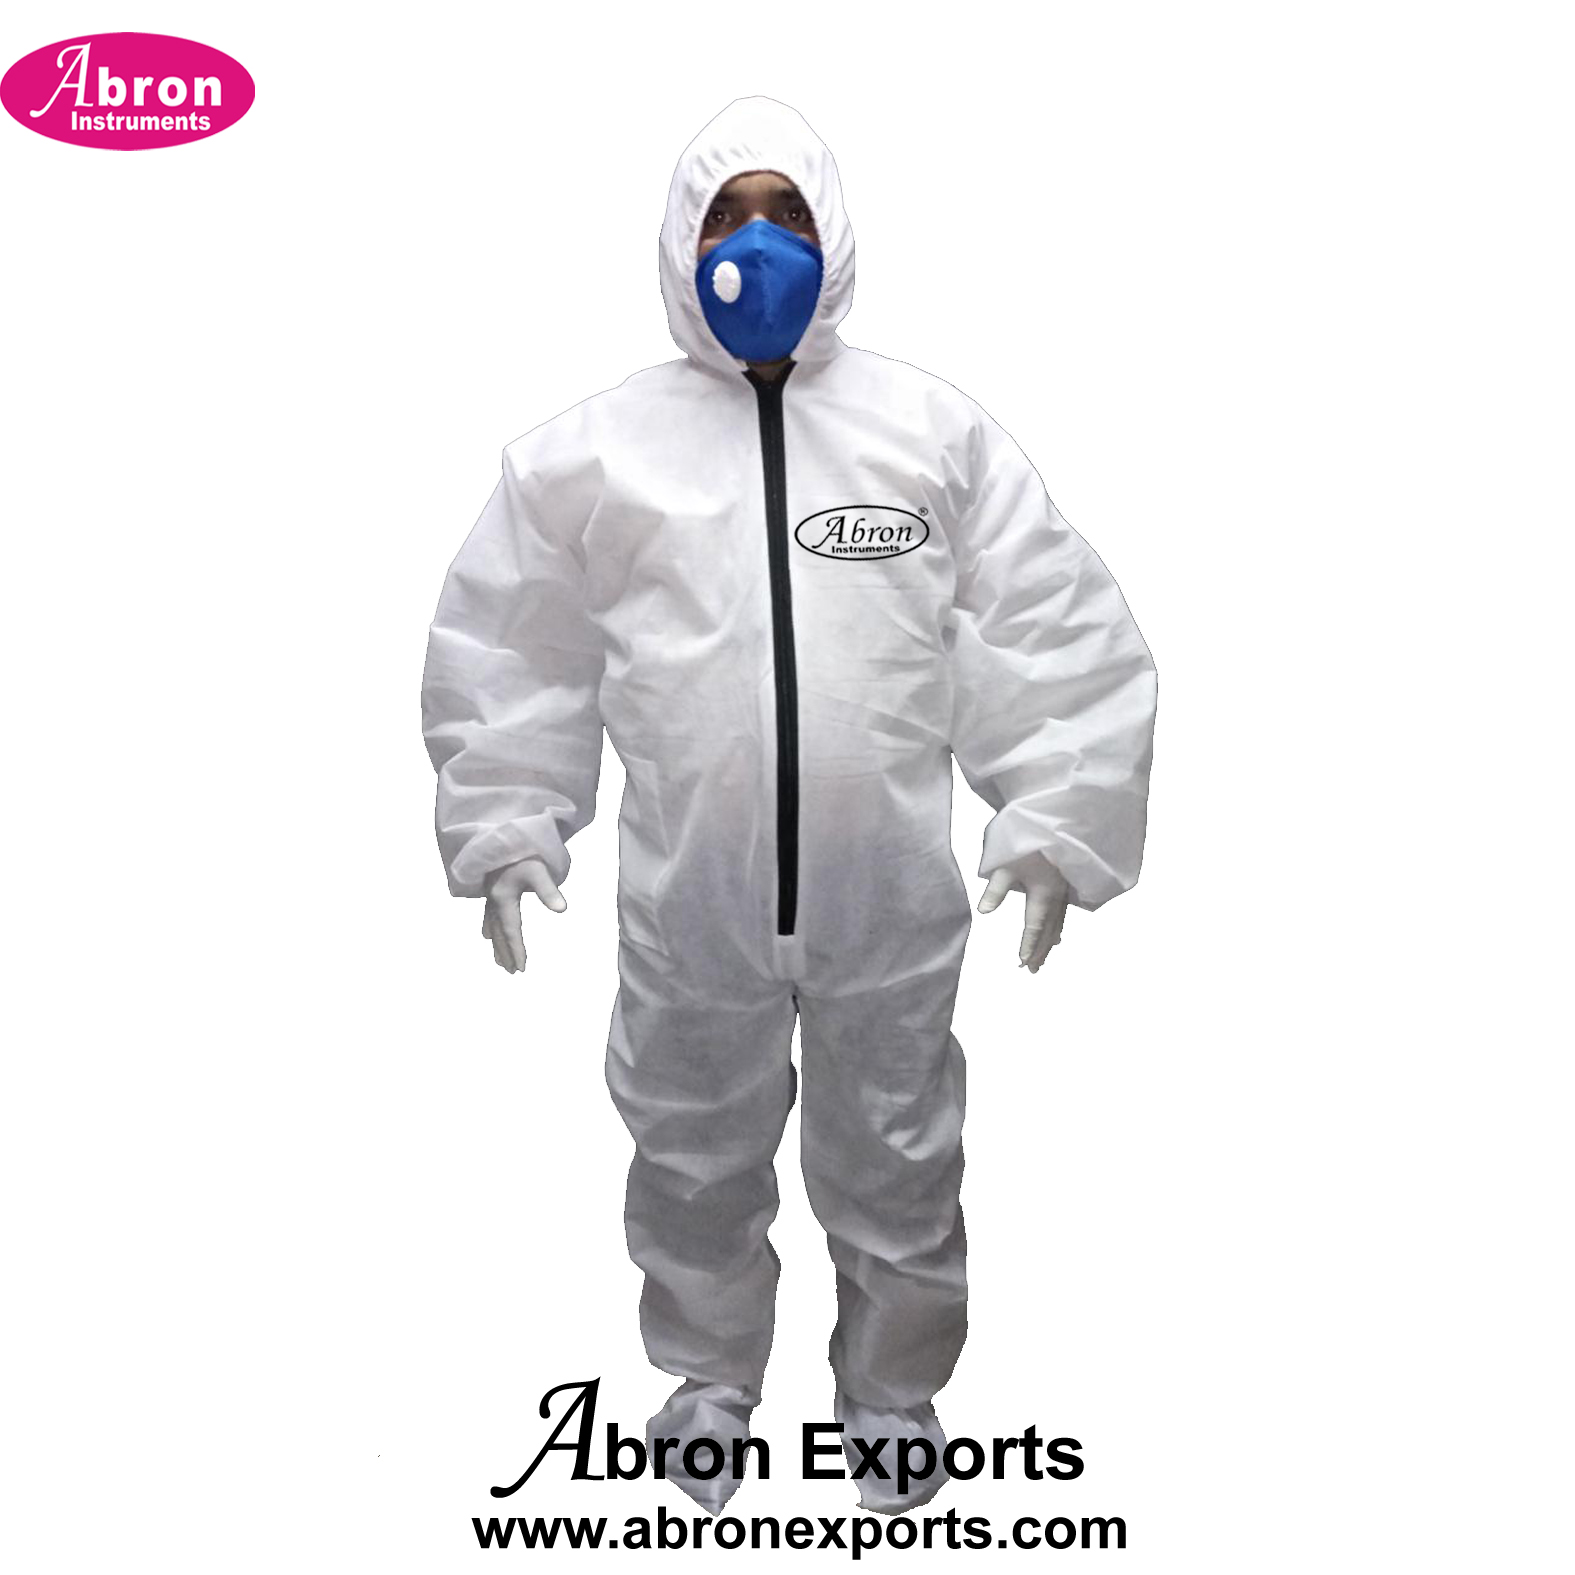 PPE Kit White Full Body Head to Feet Covered With Gloves Also Medical Safety Worn  ABM-2651KW 